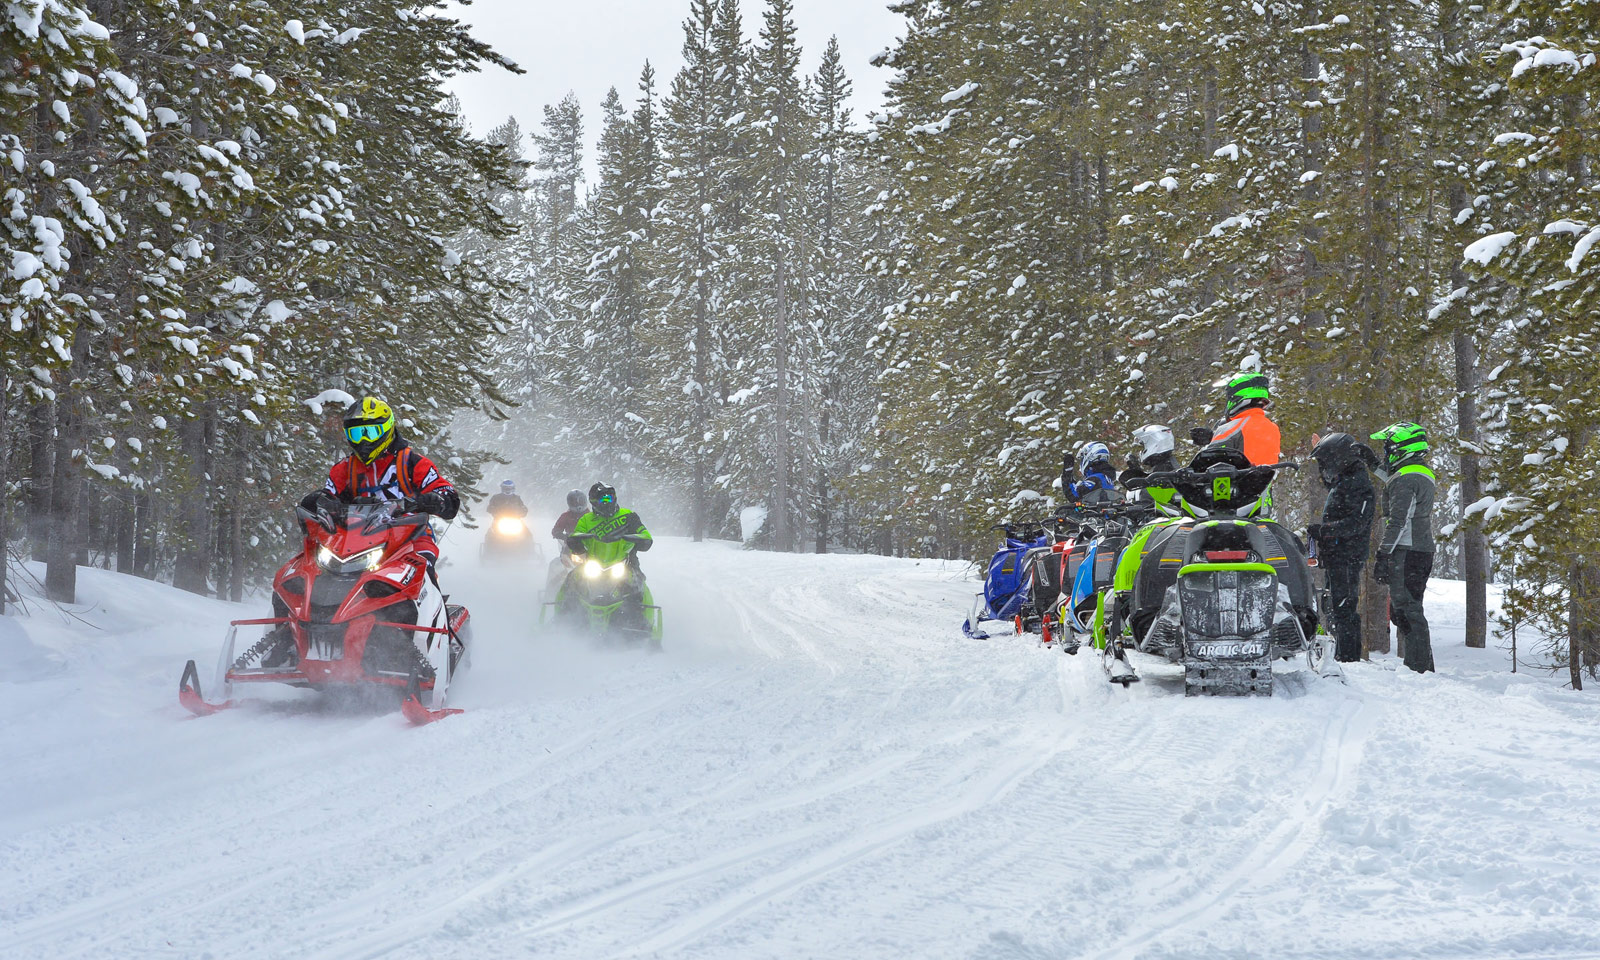 Snowmobilers riding on trail in a group